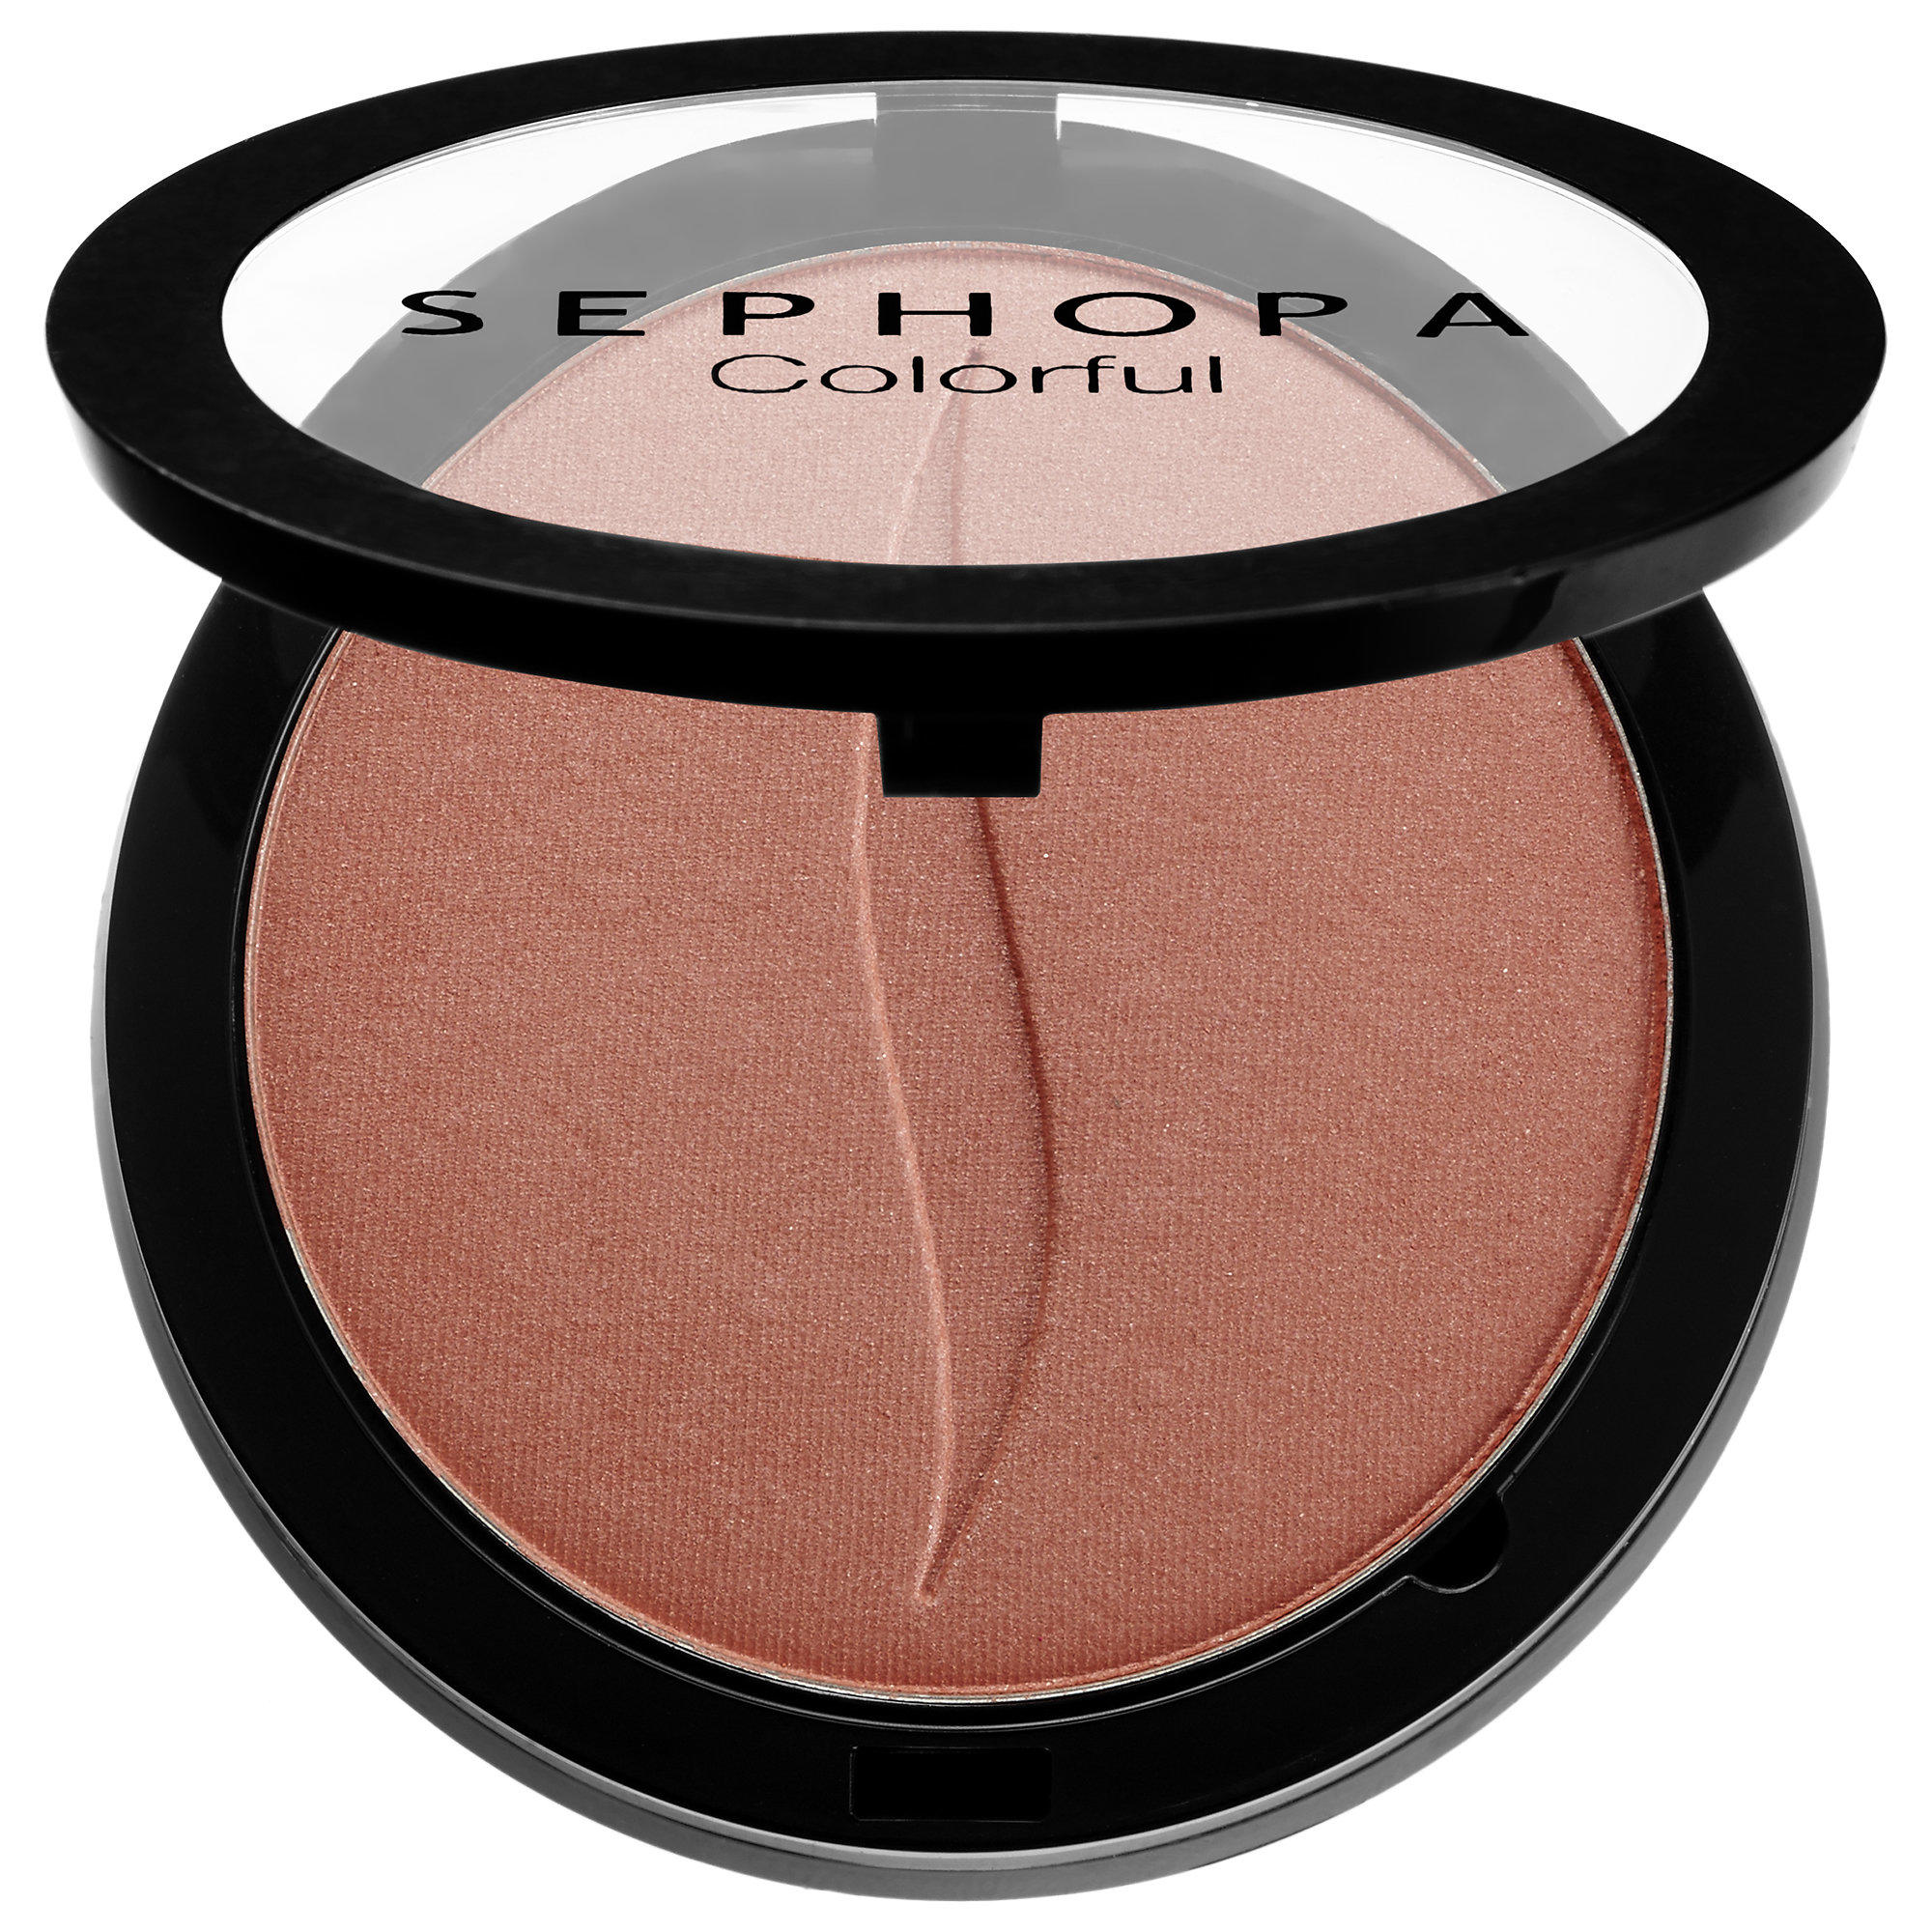 Sephora Colorful Face Powders Blush Heated No. 16